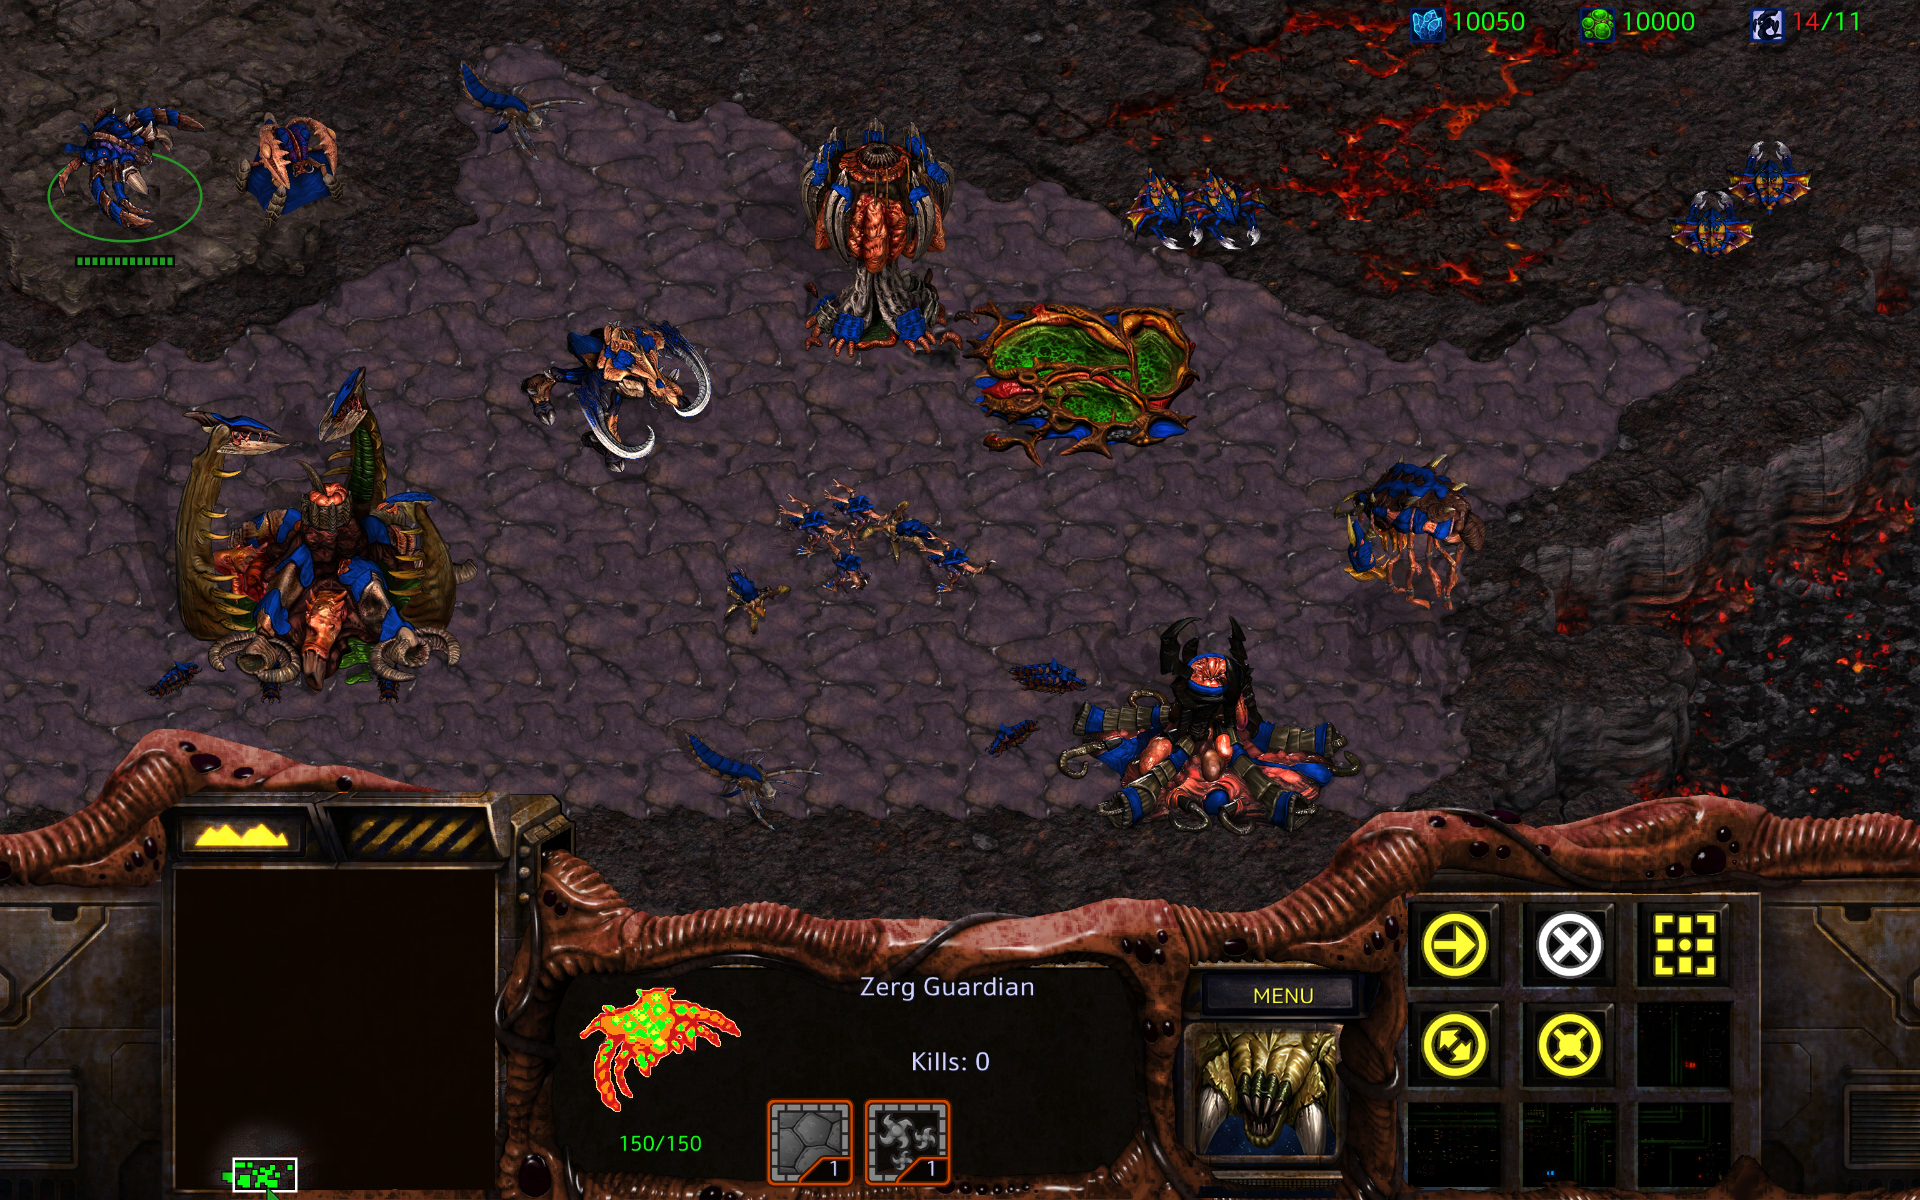 What We Like And Love About StarCraft: Remastered